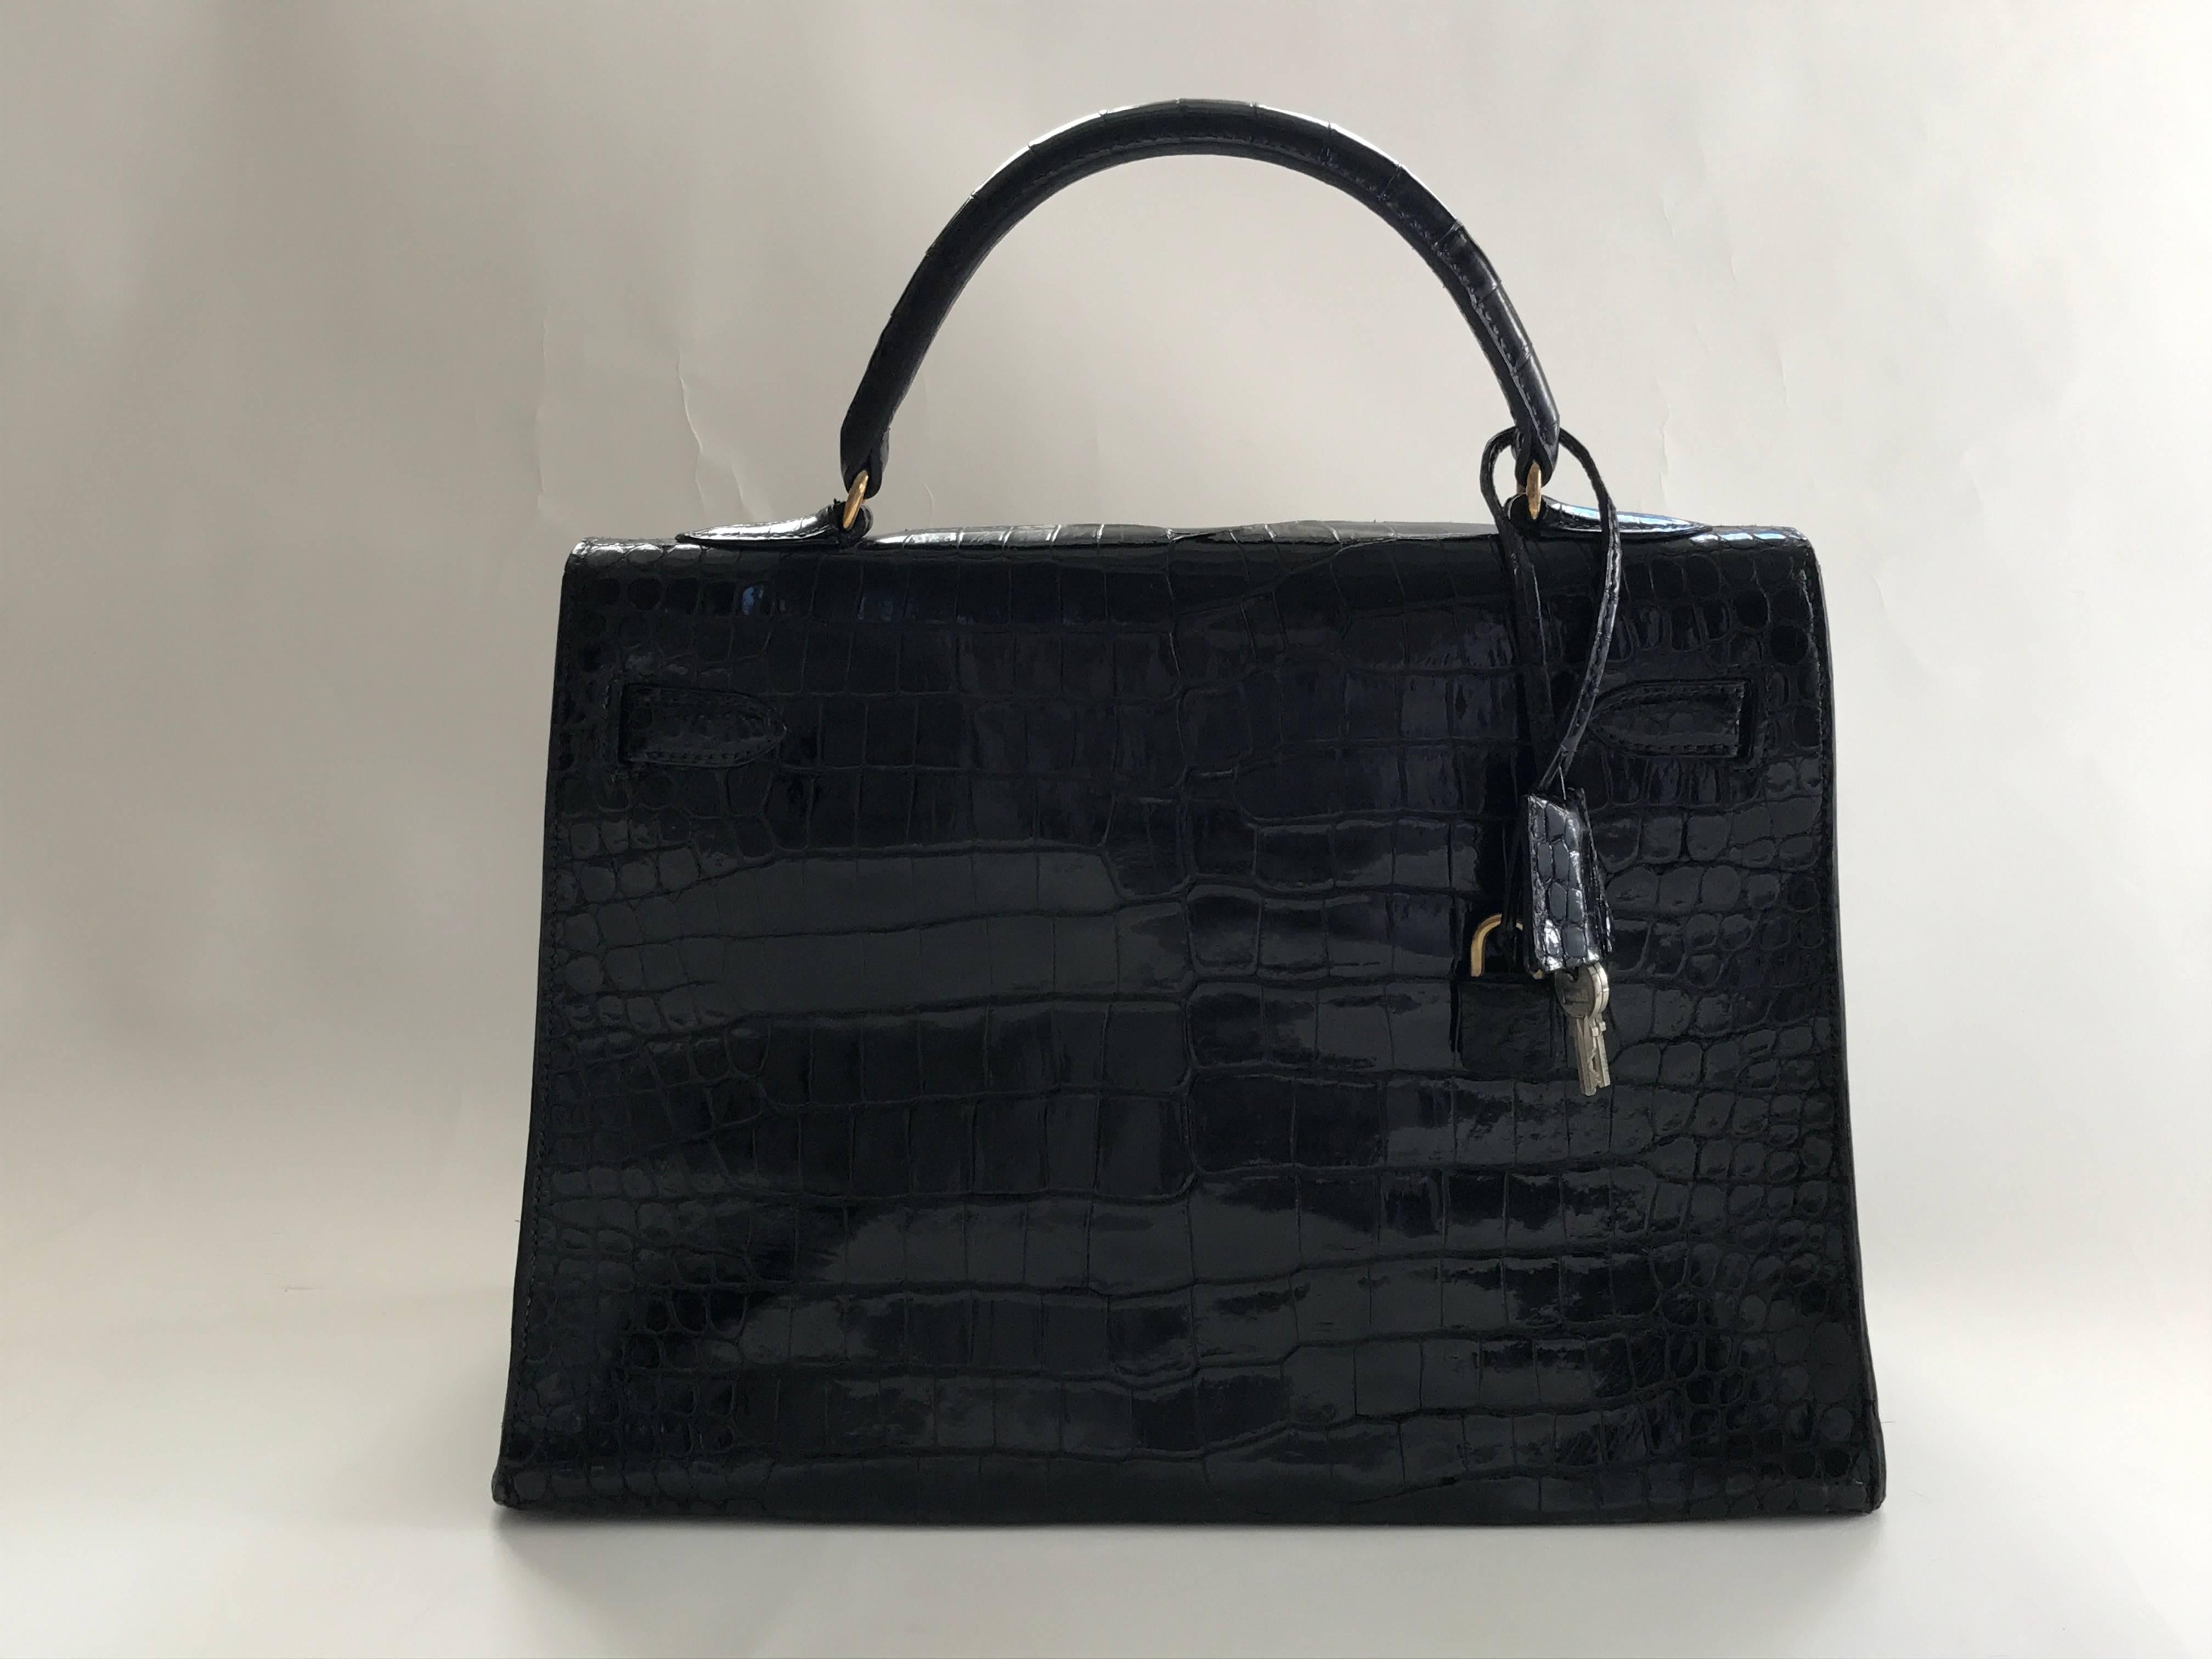 Black vintage Hèrmes Kelly 32 with gold plated hardware. Single top handle. The lining is in black chèvre leather with one large wall pocket and two smaller ones. The bag comes with box, dust bags, lock and two keys, and the original comb in a croc